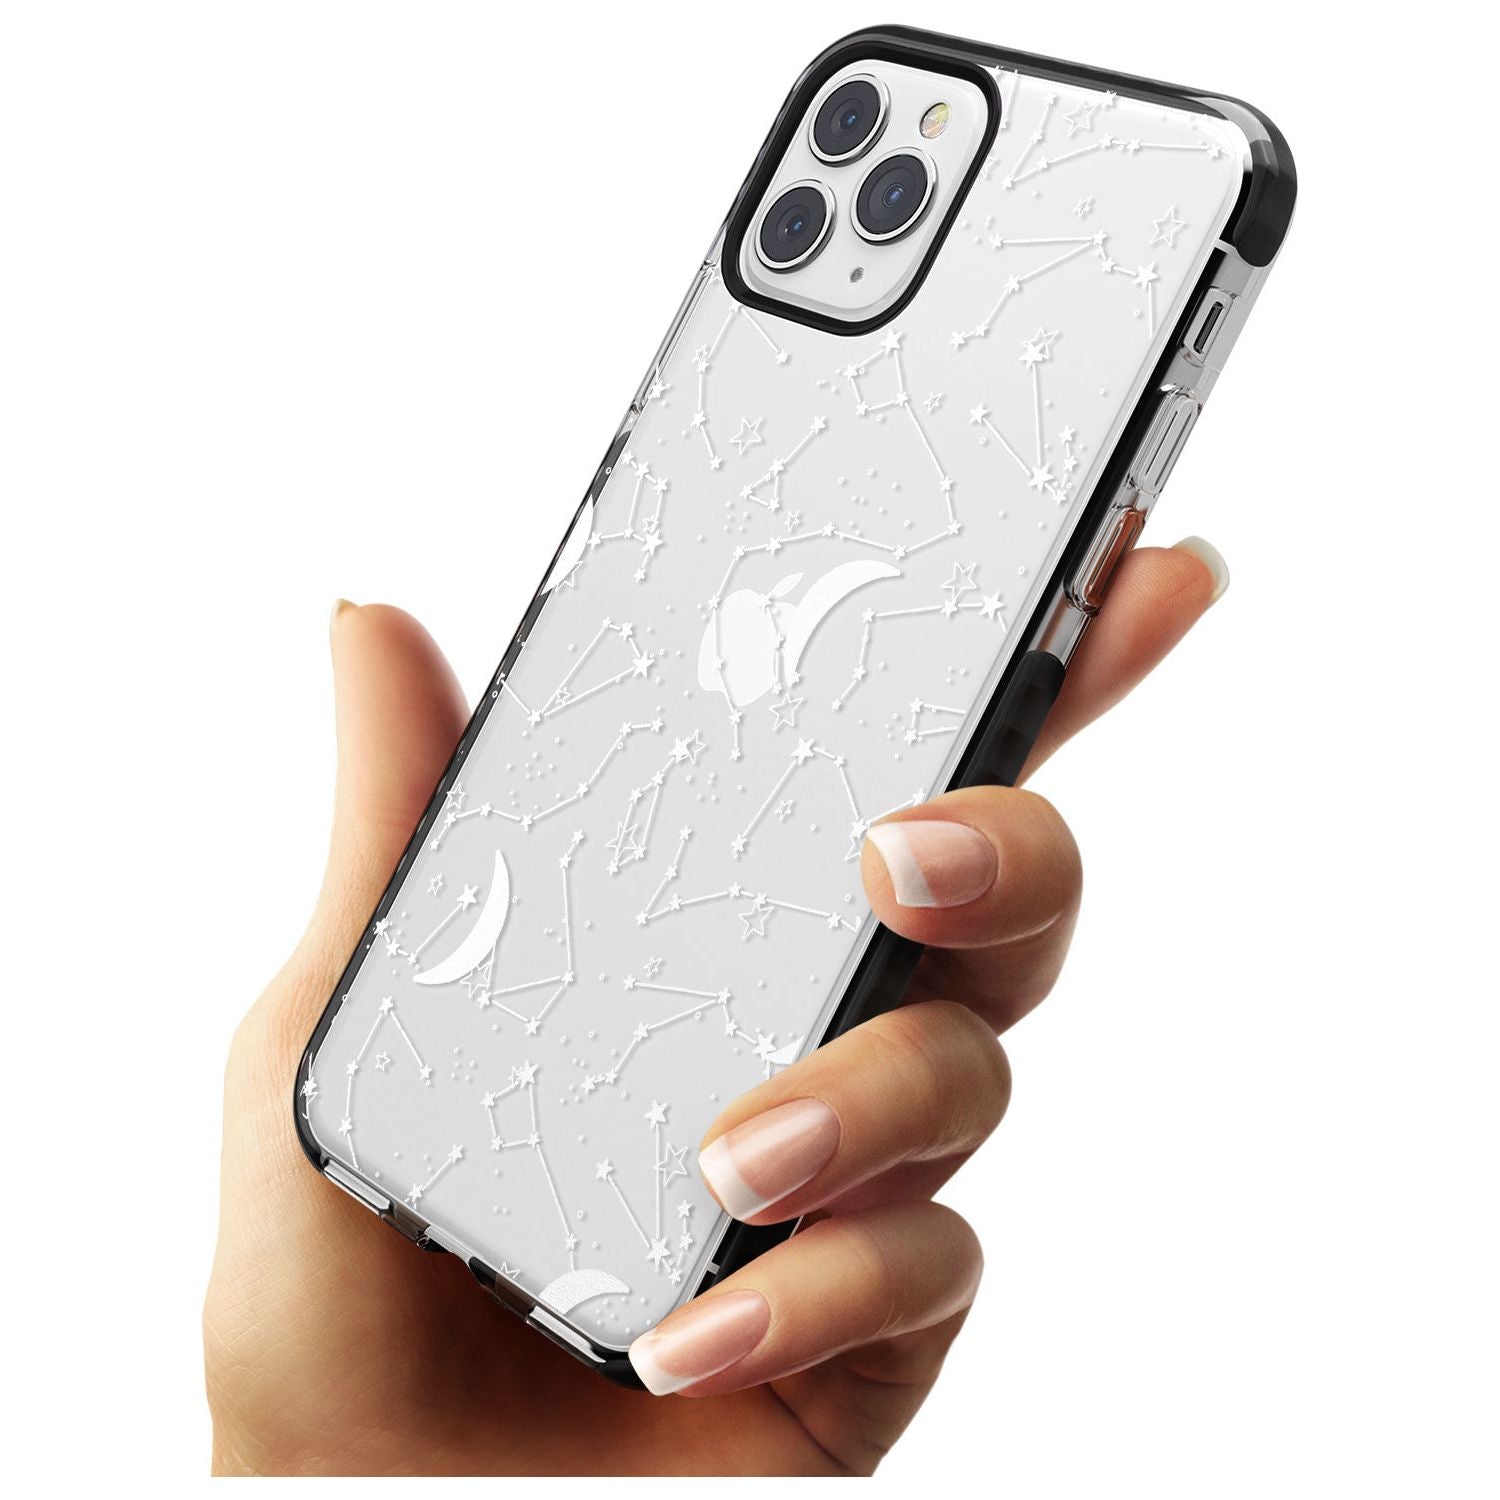 White Constellations on Clear Pink Fade Impact Phone Case for iPhone 11